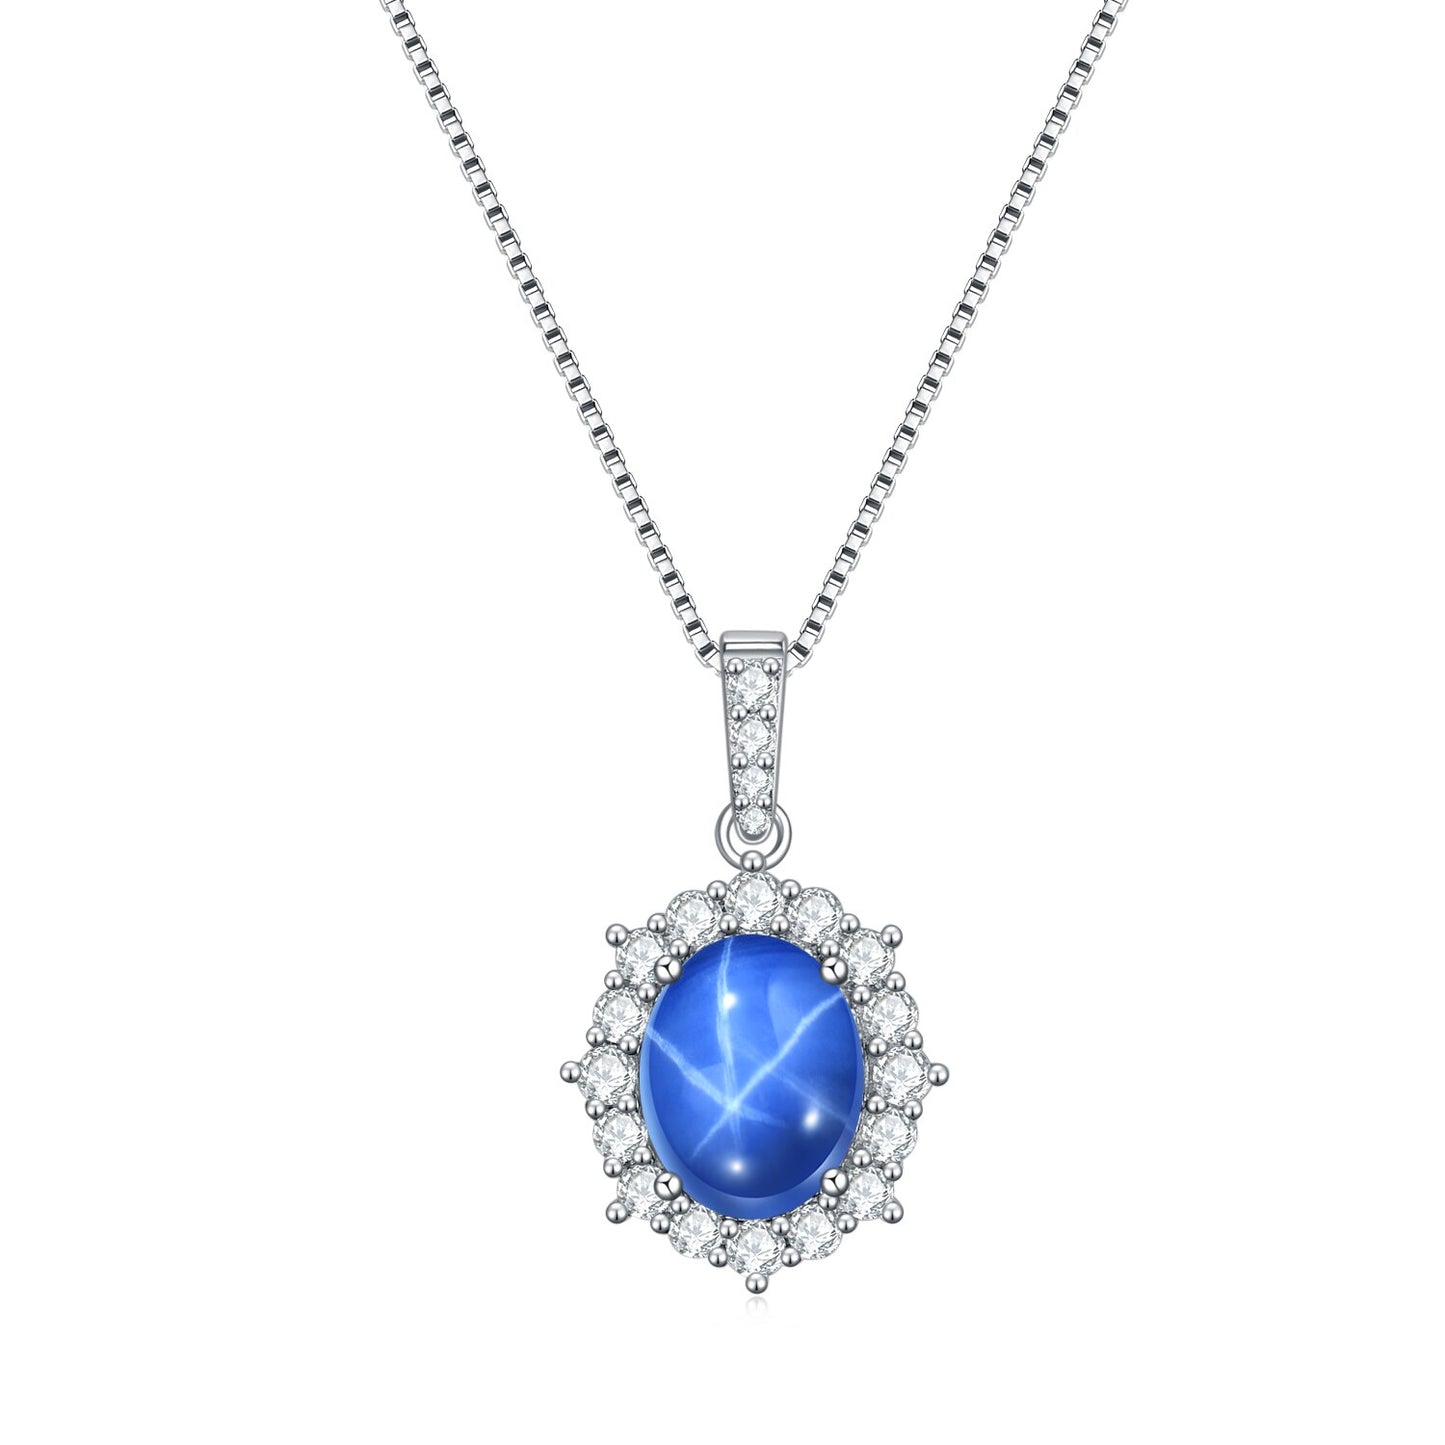 GEM&#39;S BALLET Dainty Blue Lindy Star Sapphire Statement Pendant Necklace in 925 Sterling Silver Gift For Her Mothers Day Gifts Lab Star Sapphire 45cm|925 Sterling Silver